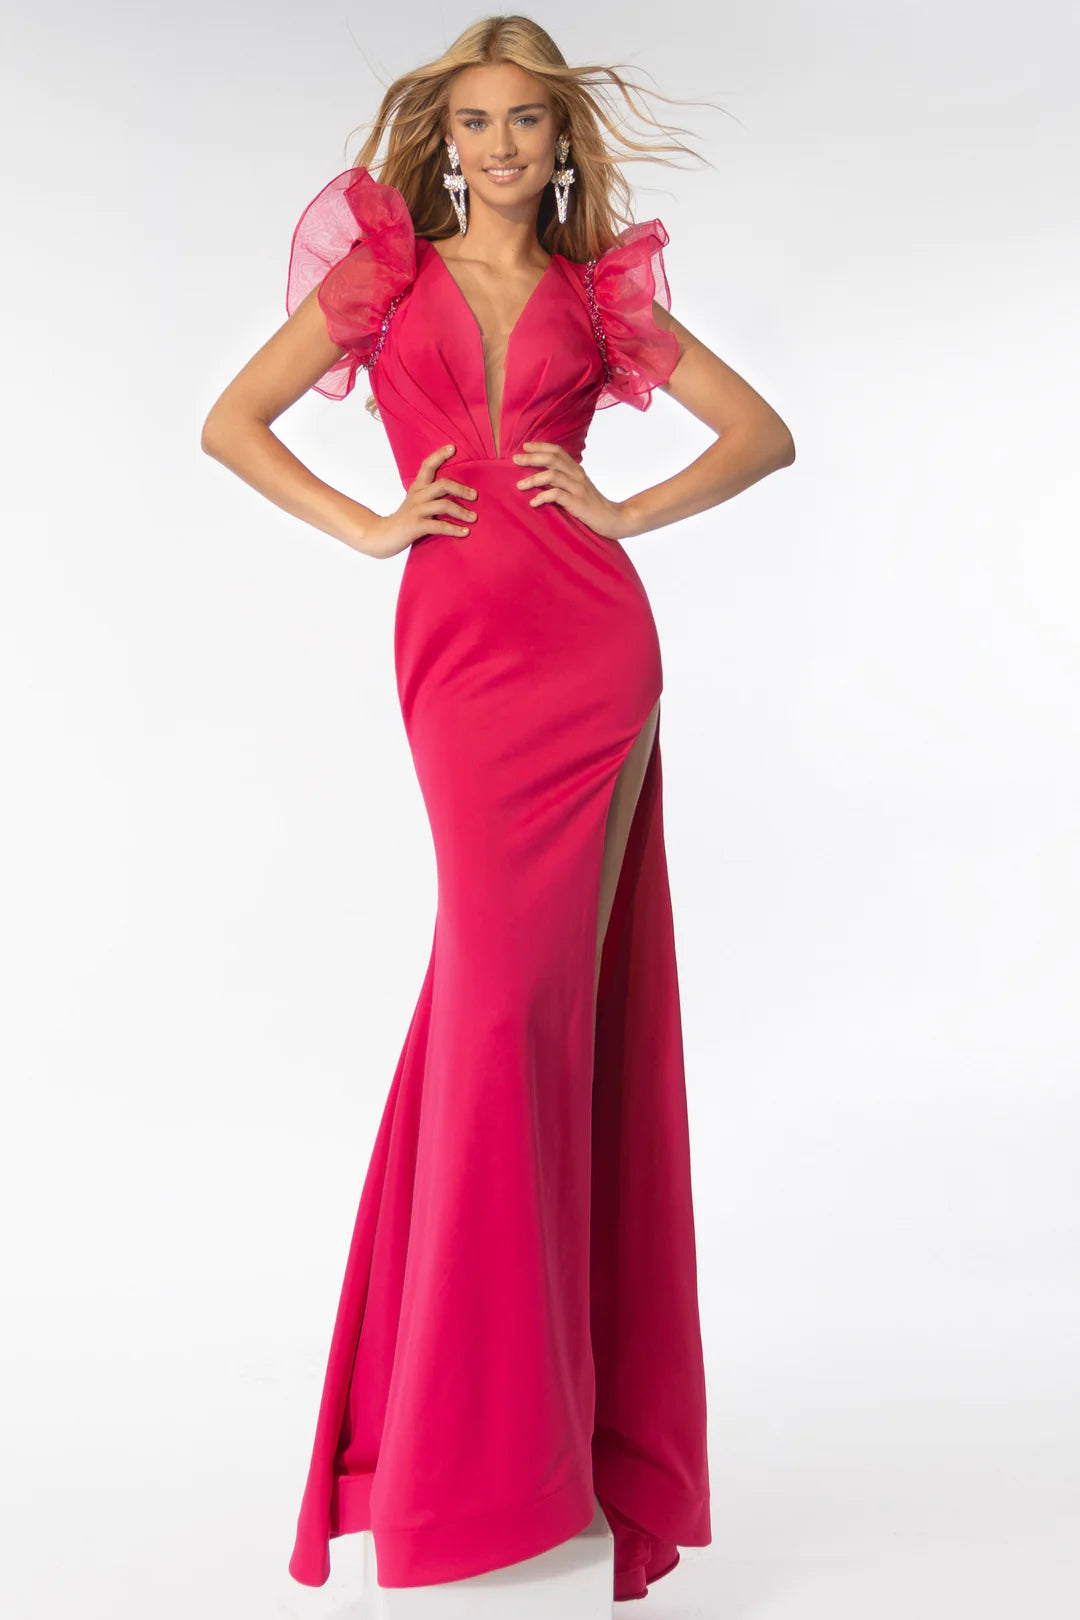 Expertly crafted for a flawless silhouette, the Ava Presley 39307 prom dress is a must-have for formal events. Crafted from thick jersey and organza, it boasts ruffle shoulder detailing that adds a touch of elegance. Make a statement with this pageant-worthy gown.